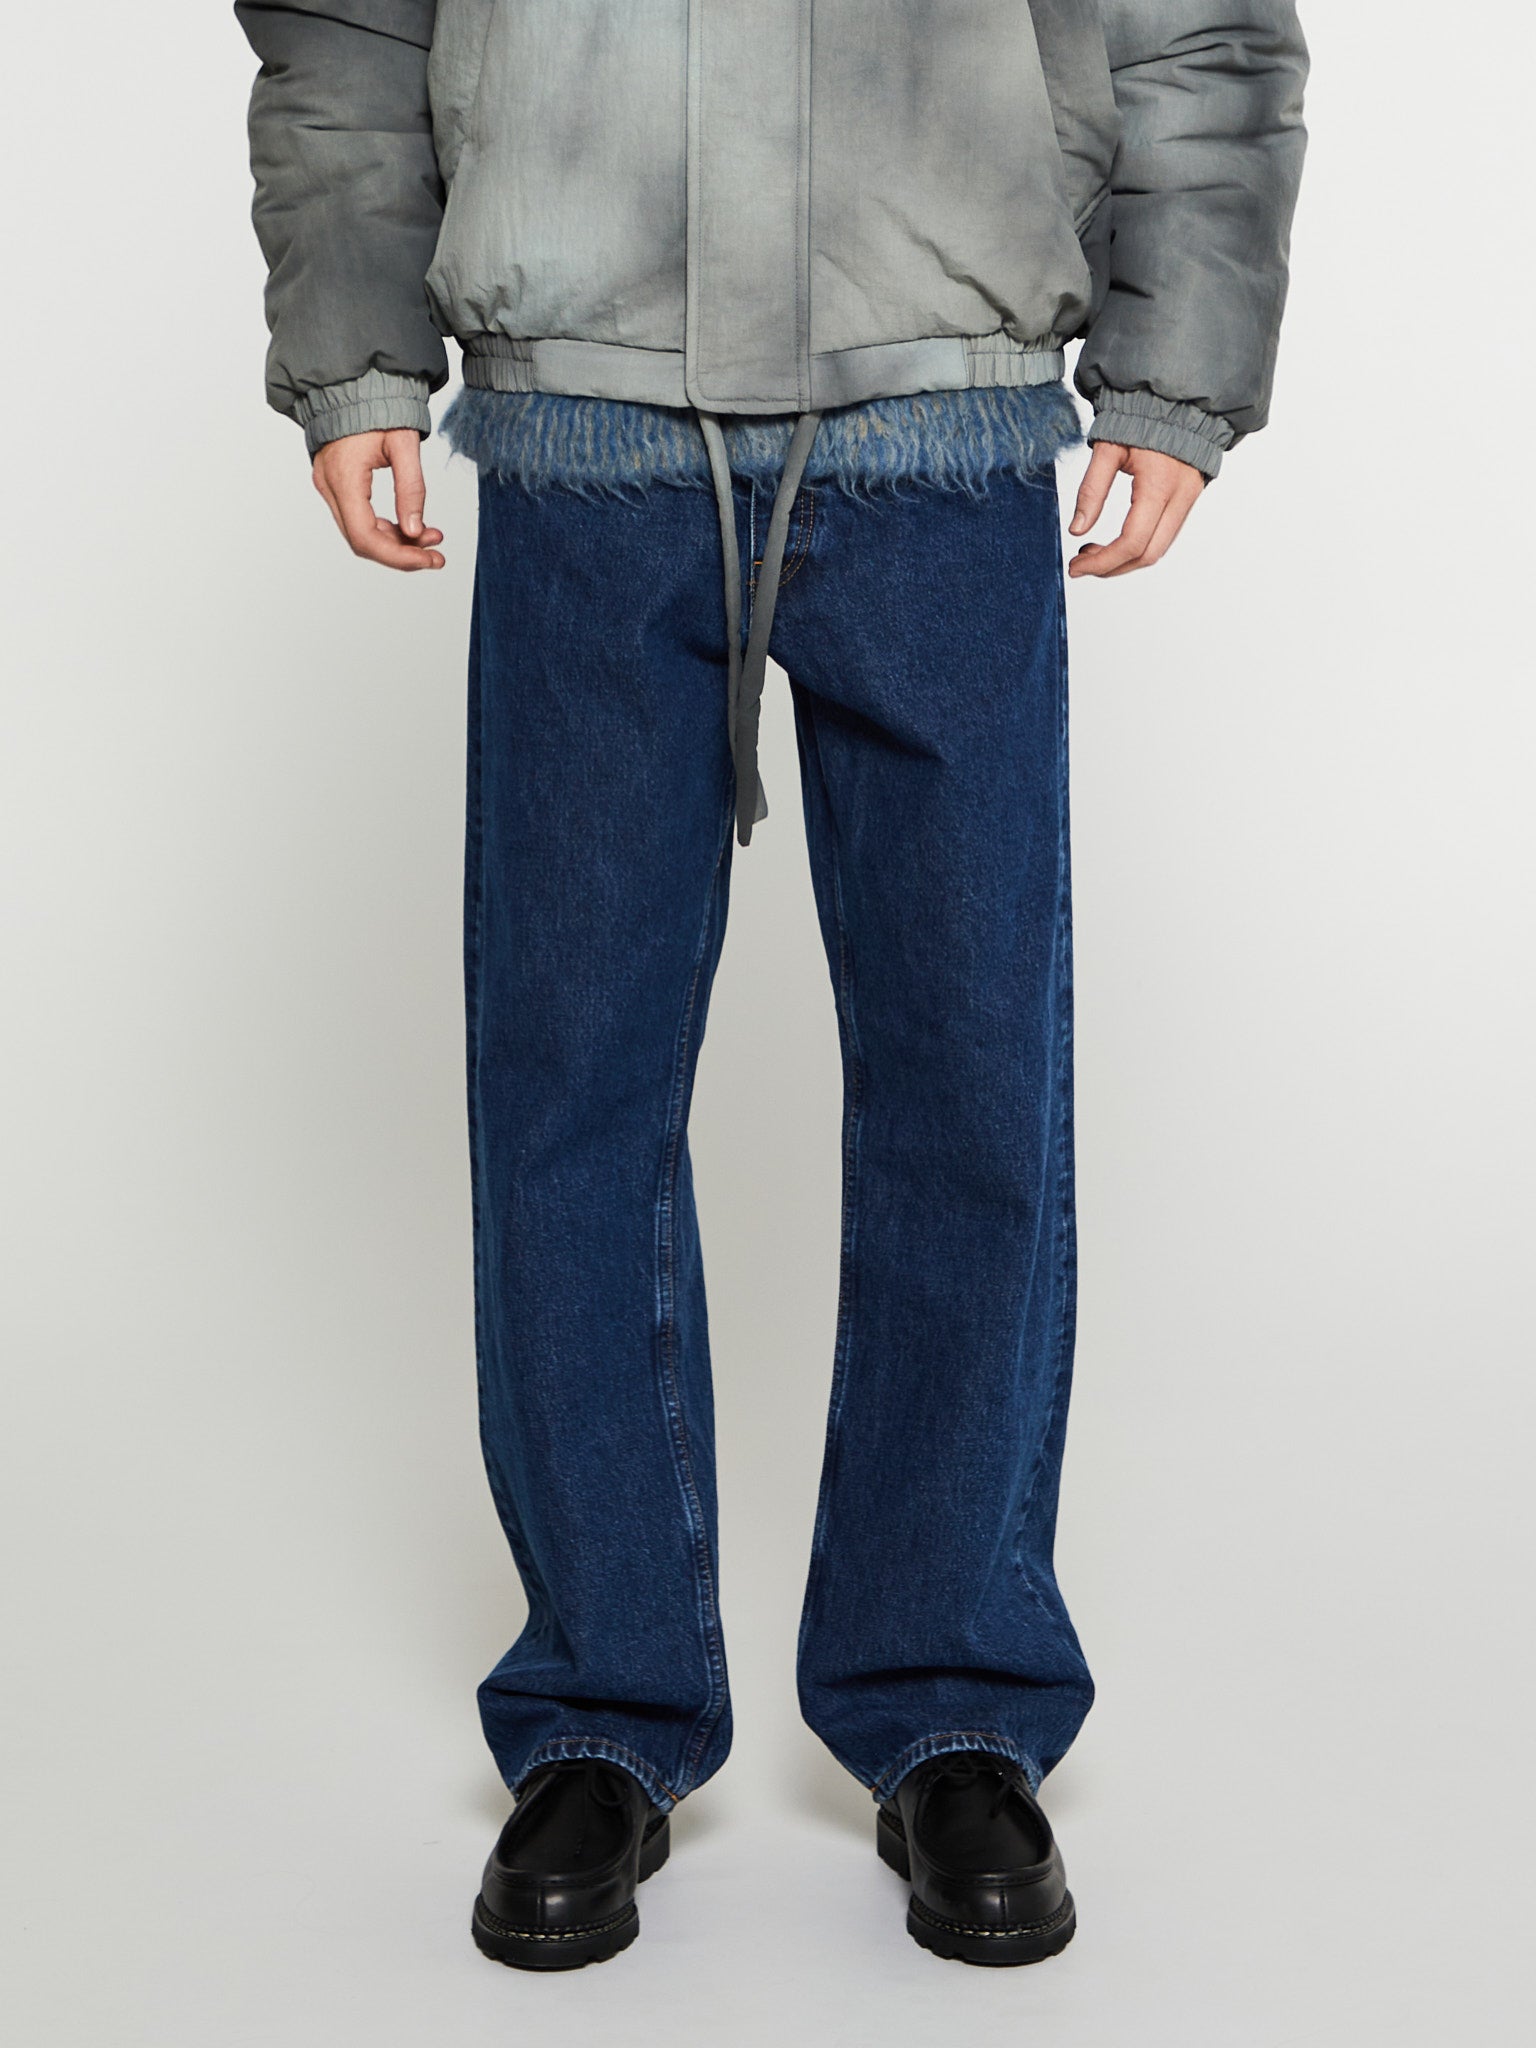 Sunflower - Loose Jeans in Rinse Blue